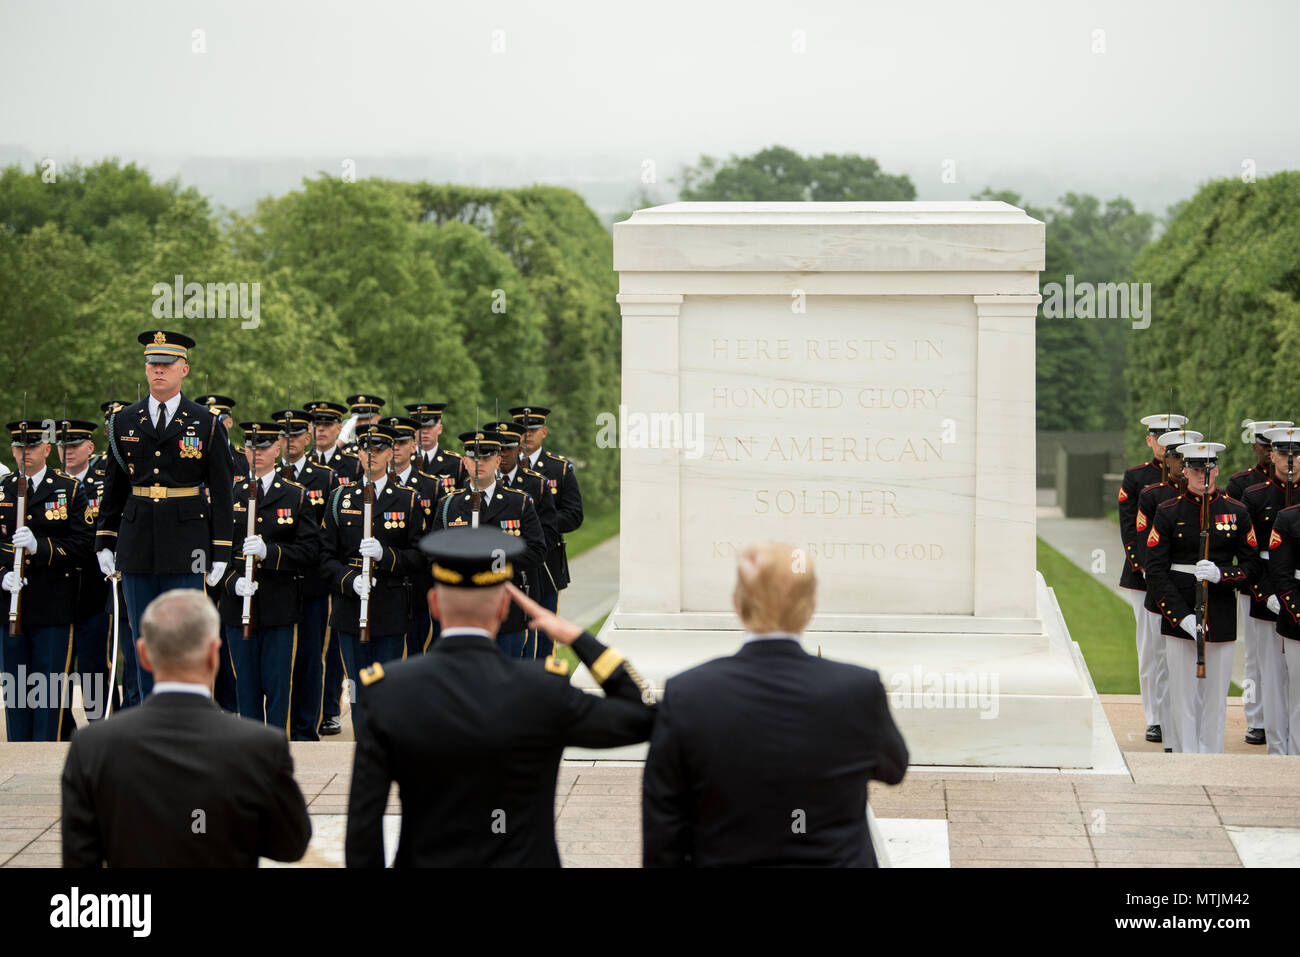 President Donald J. Trump lays a wreath at the Tomb of the Unknown Soldier during a Memorial Day ceremony with Secretary of Defense James N. Mattis and Chairman of the Joint Chiefs of Staff Marine Gen. Joseph F. Dunford Jr., at Arlington National Cemetery in Arlington, Va., May 28, 2018. (DoD photo by Army Sgt. Amber I. Smith) Stock Photo